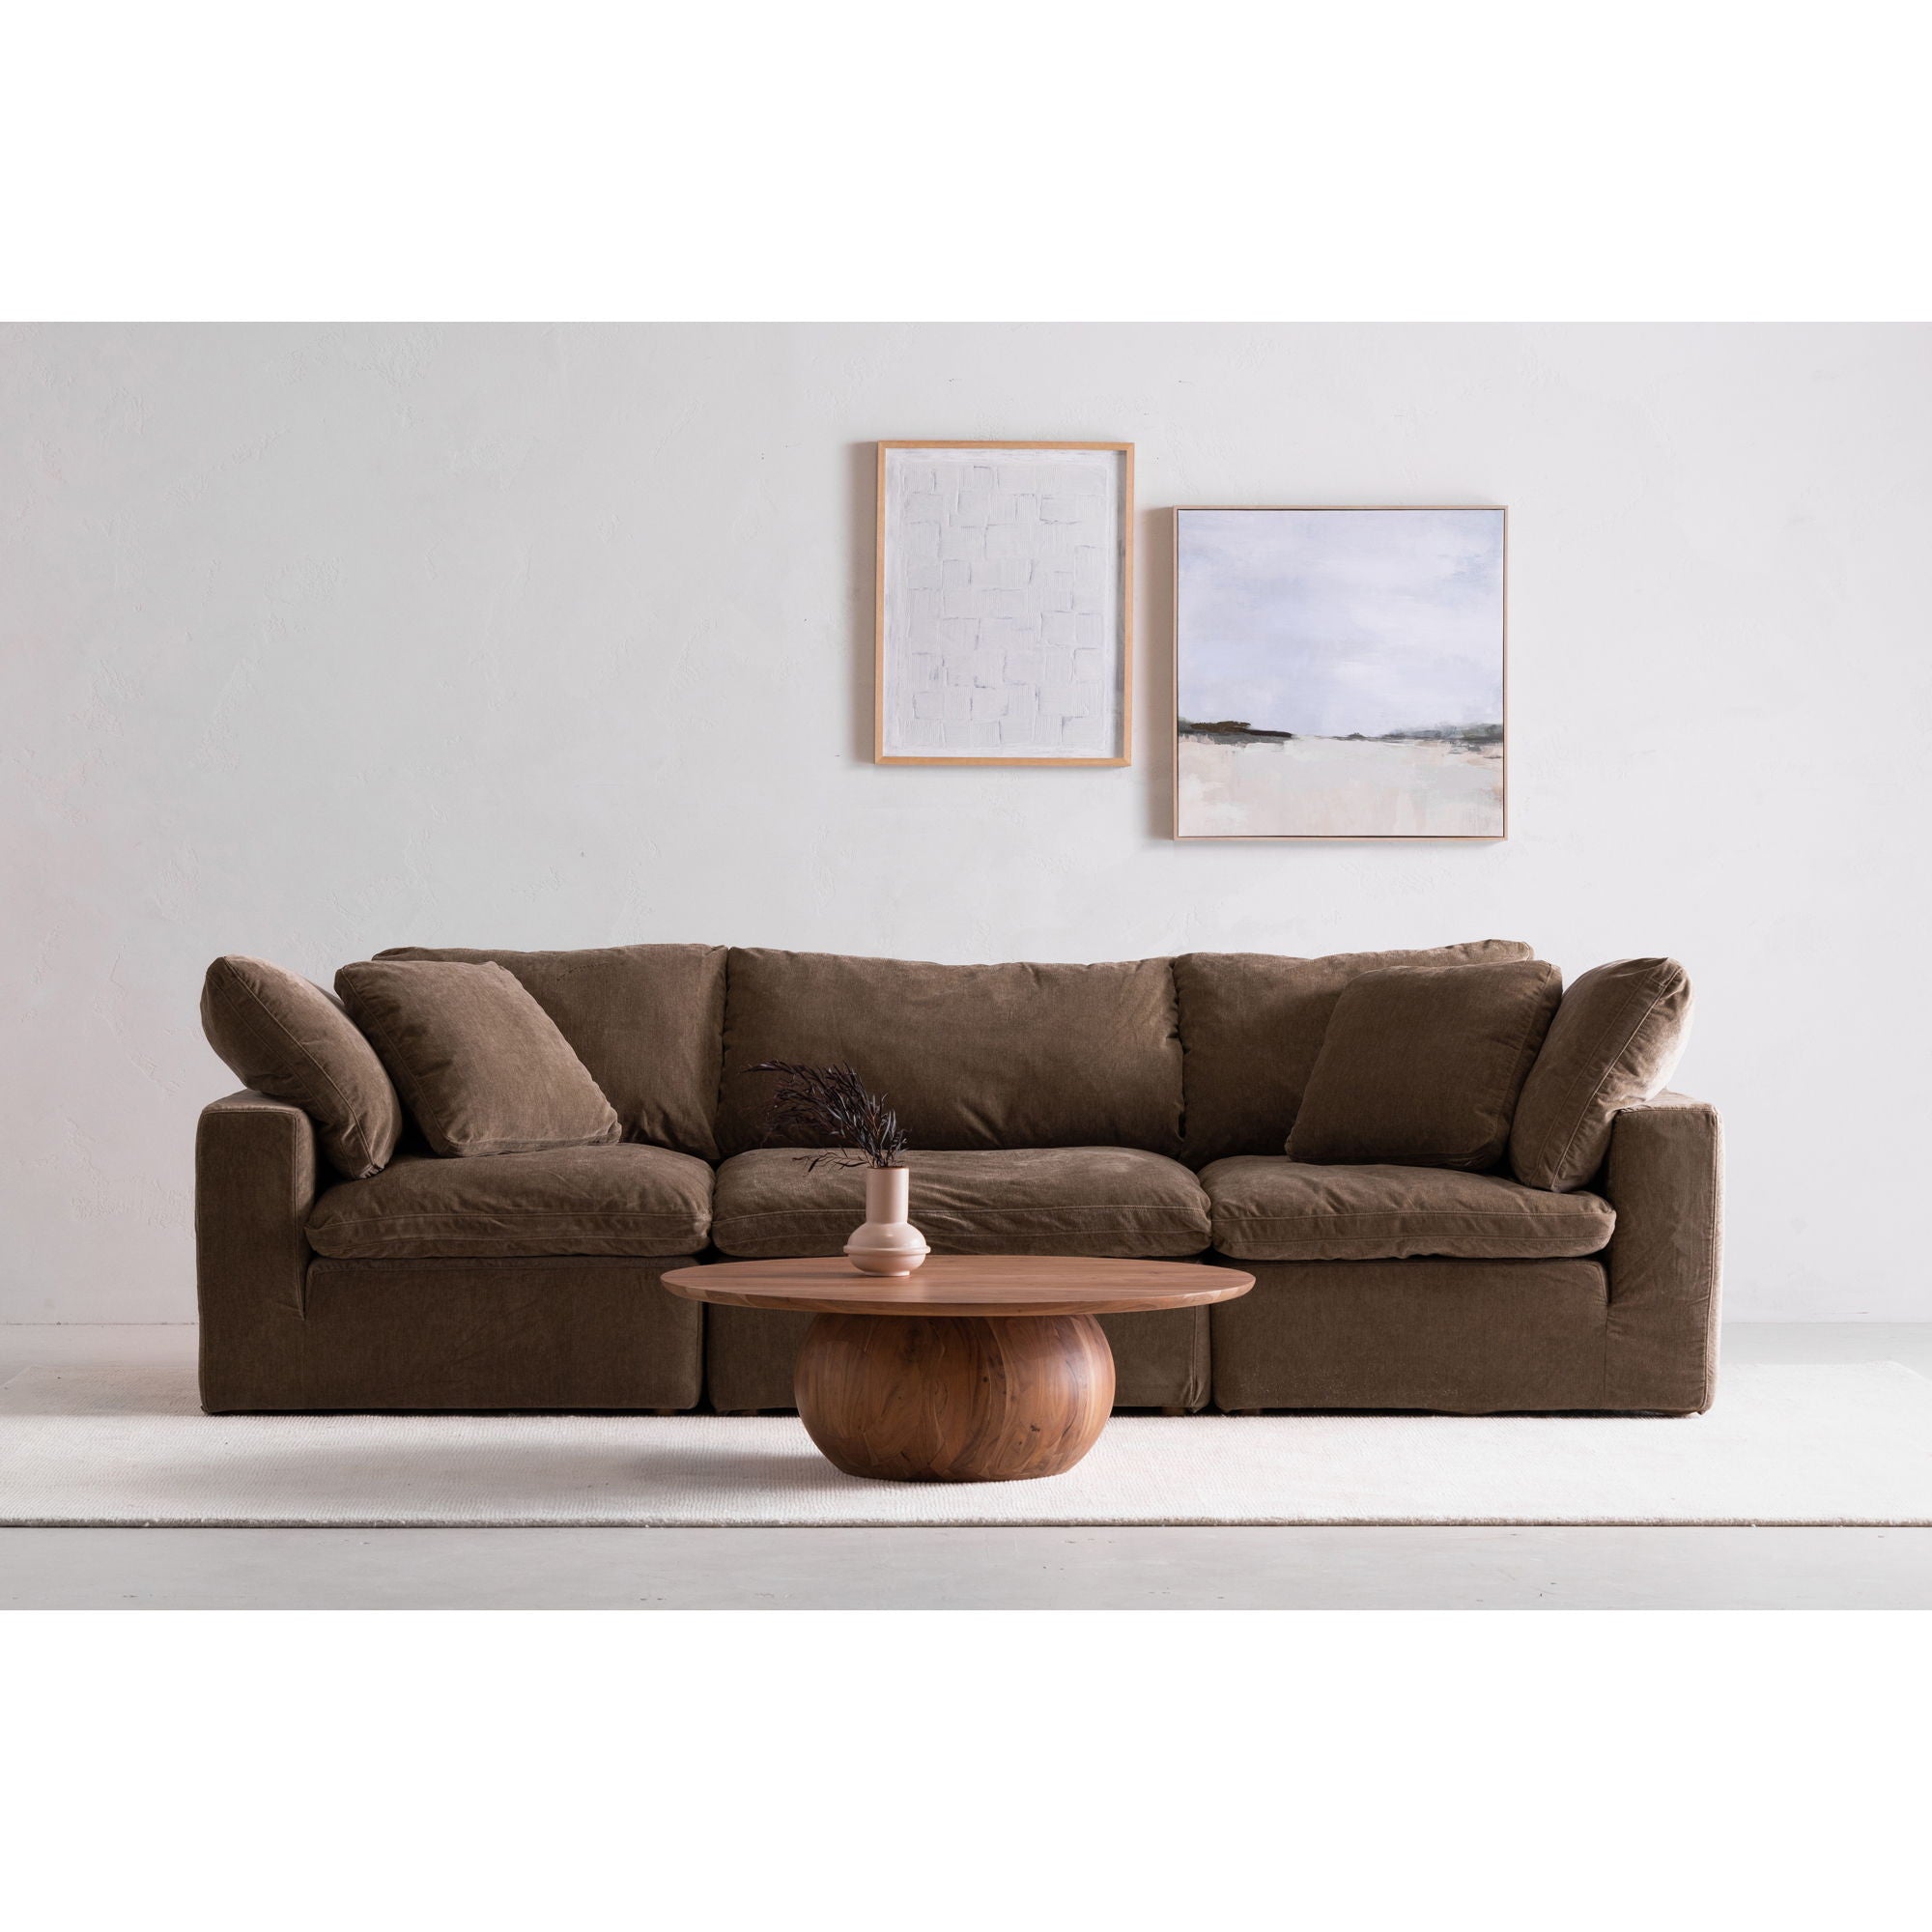 Terra - Modular Sofa Performance Fabric - Desert Sage-Stationary Sectionals-American Furniture Outlet